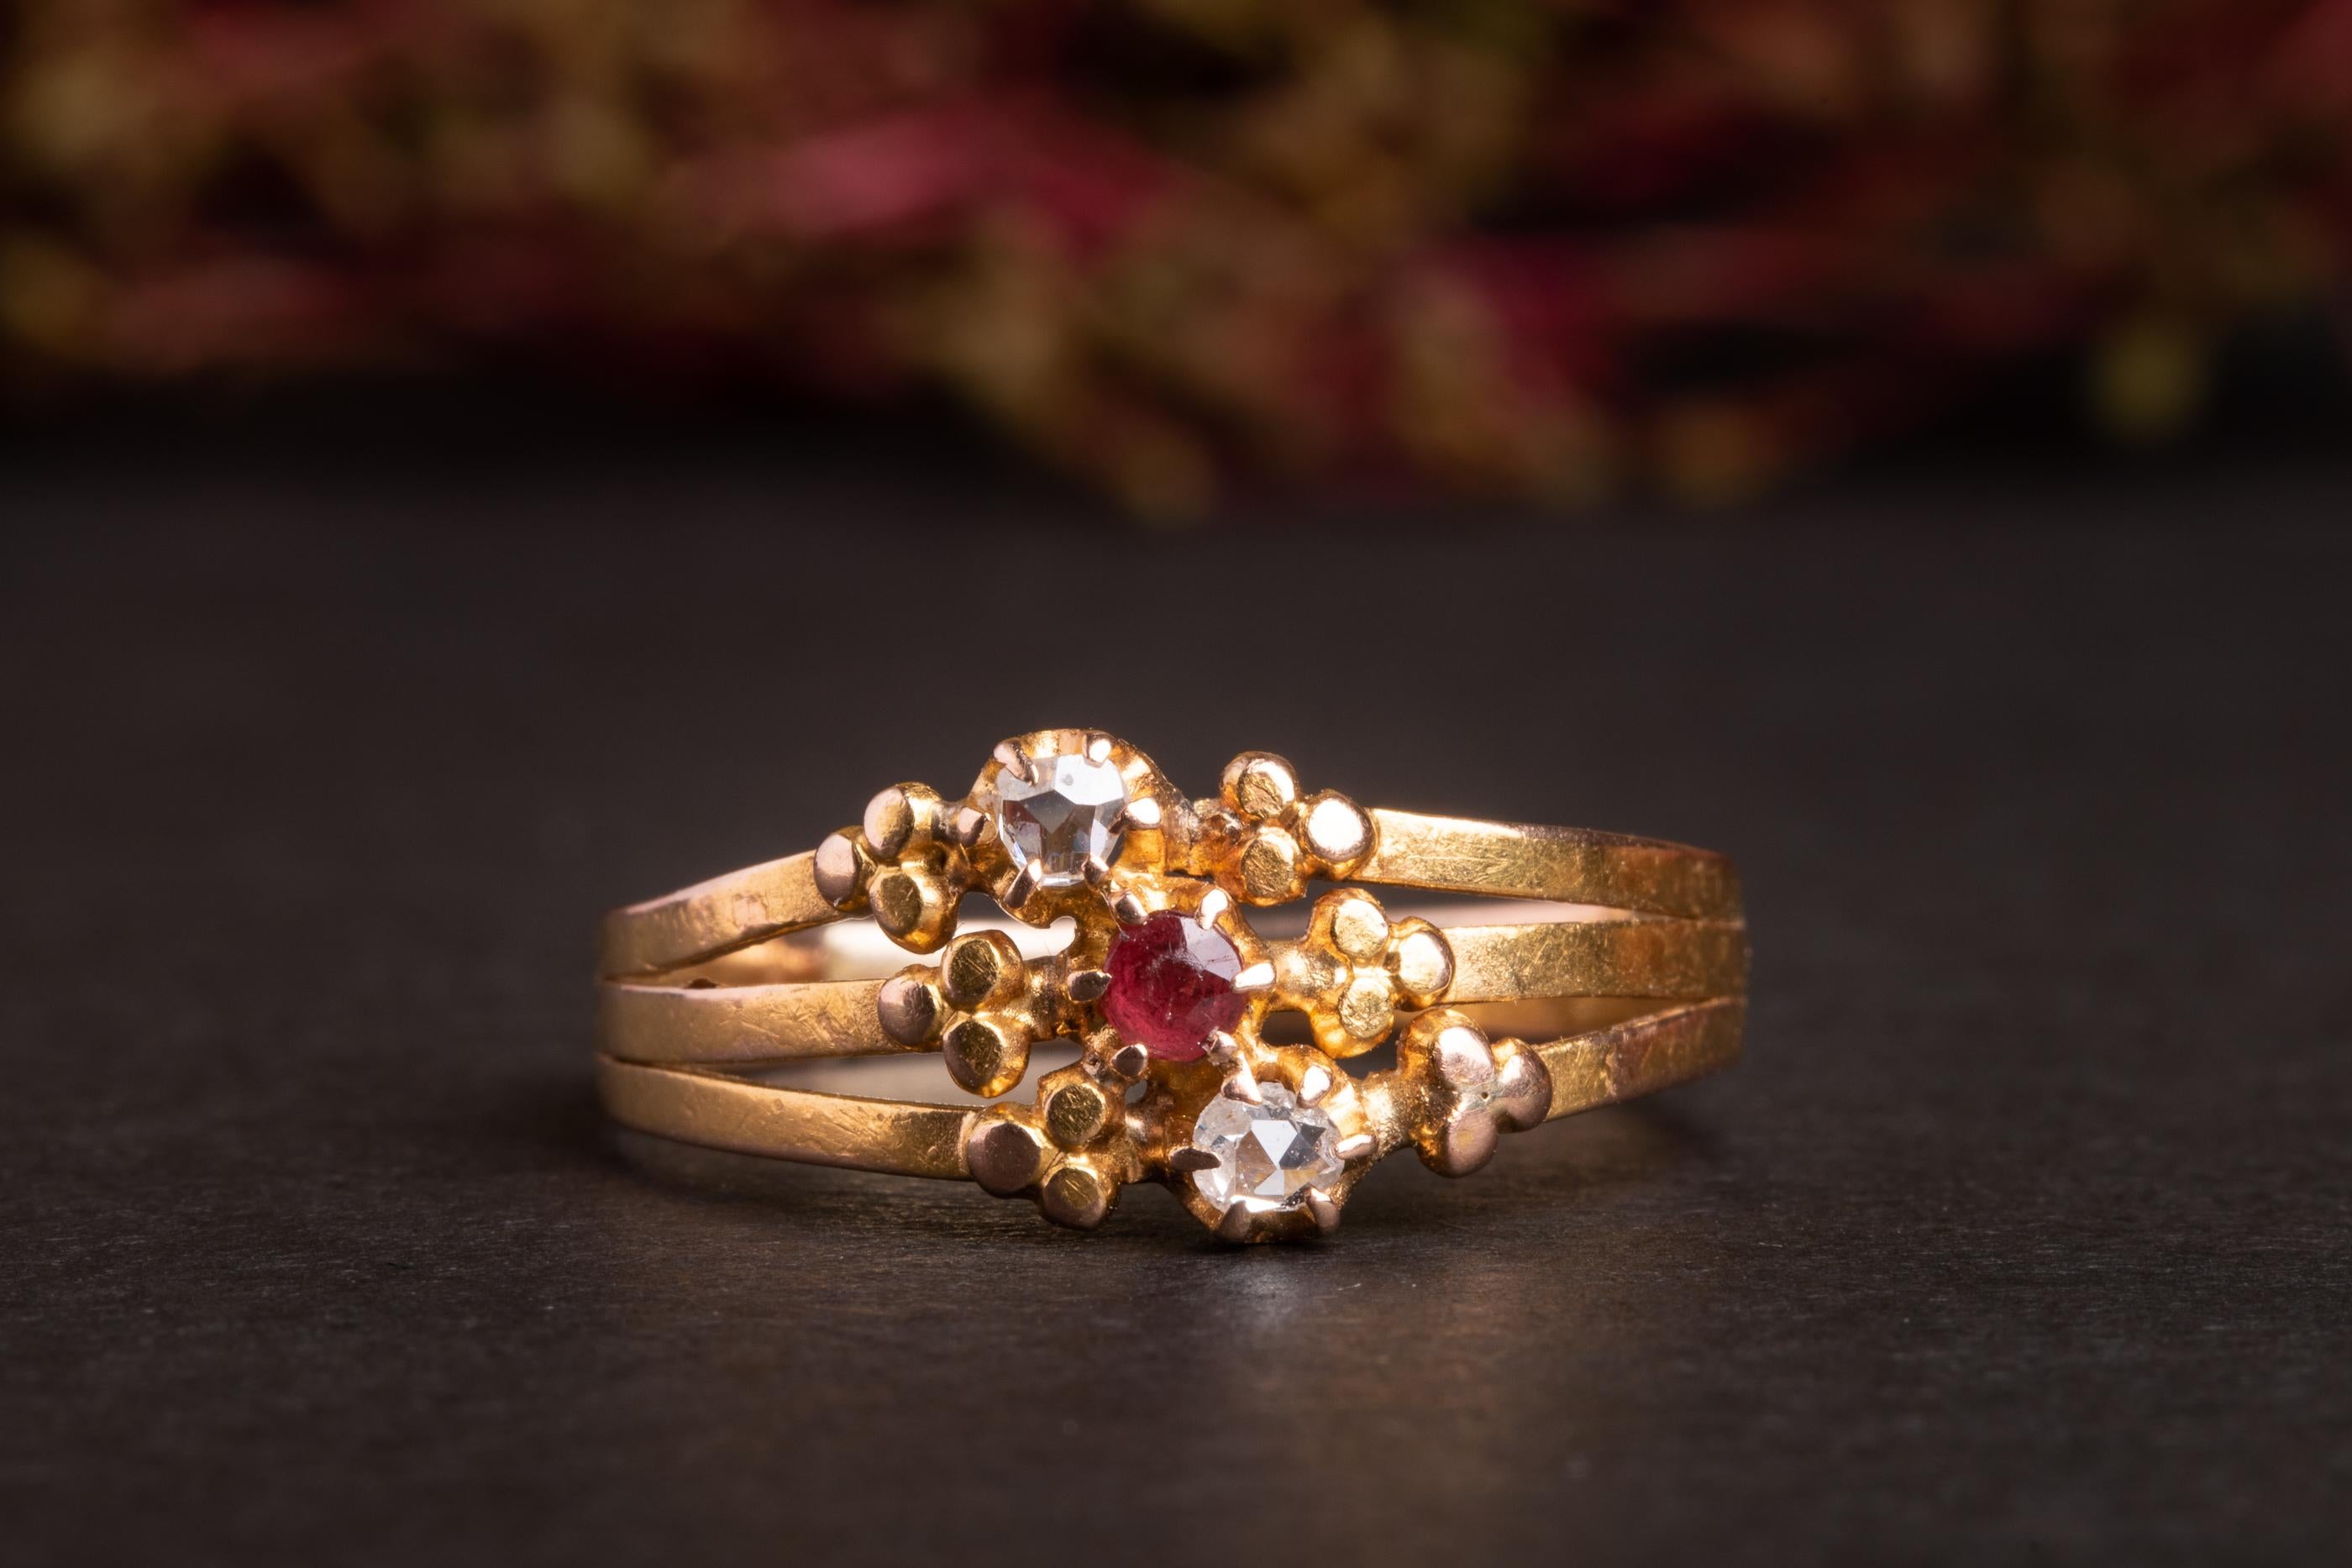 Such a lovely stackable antique ruby and diamond ring. This cute ring is made of solid 14ct yellow gold and is set with alternating diamonds and a ruby.

The shape of the ring is known as a 'Harem', it is formed by multiple (3 and more) stacked